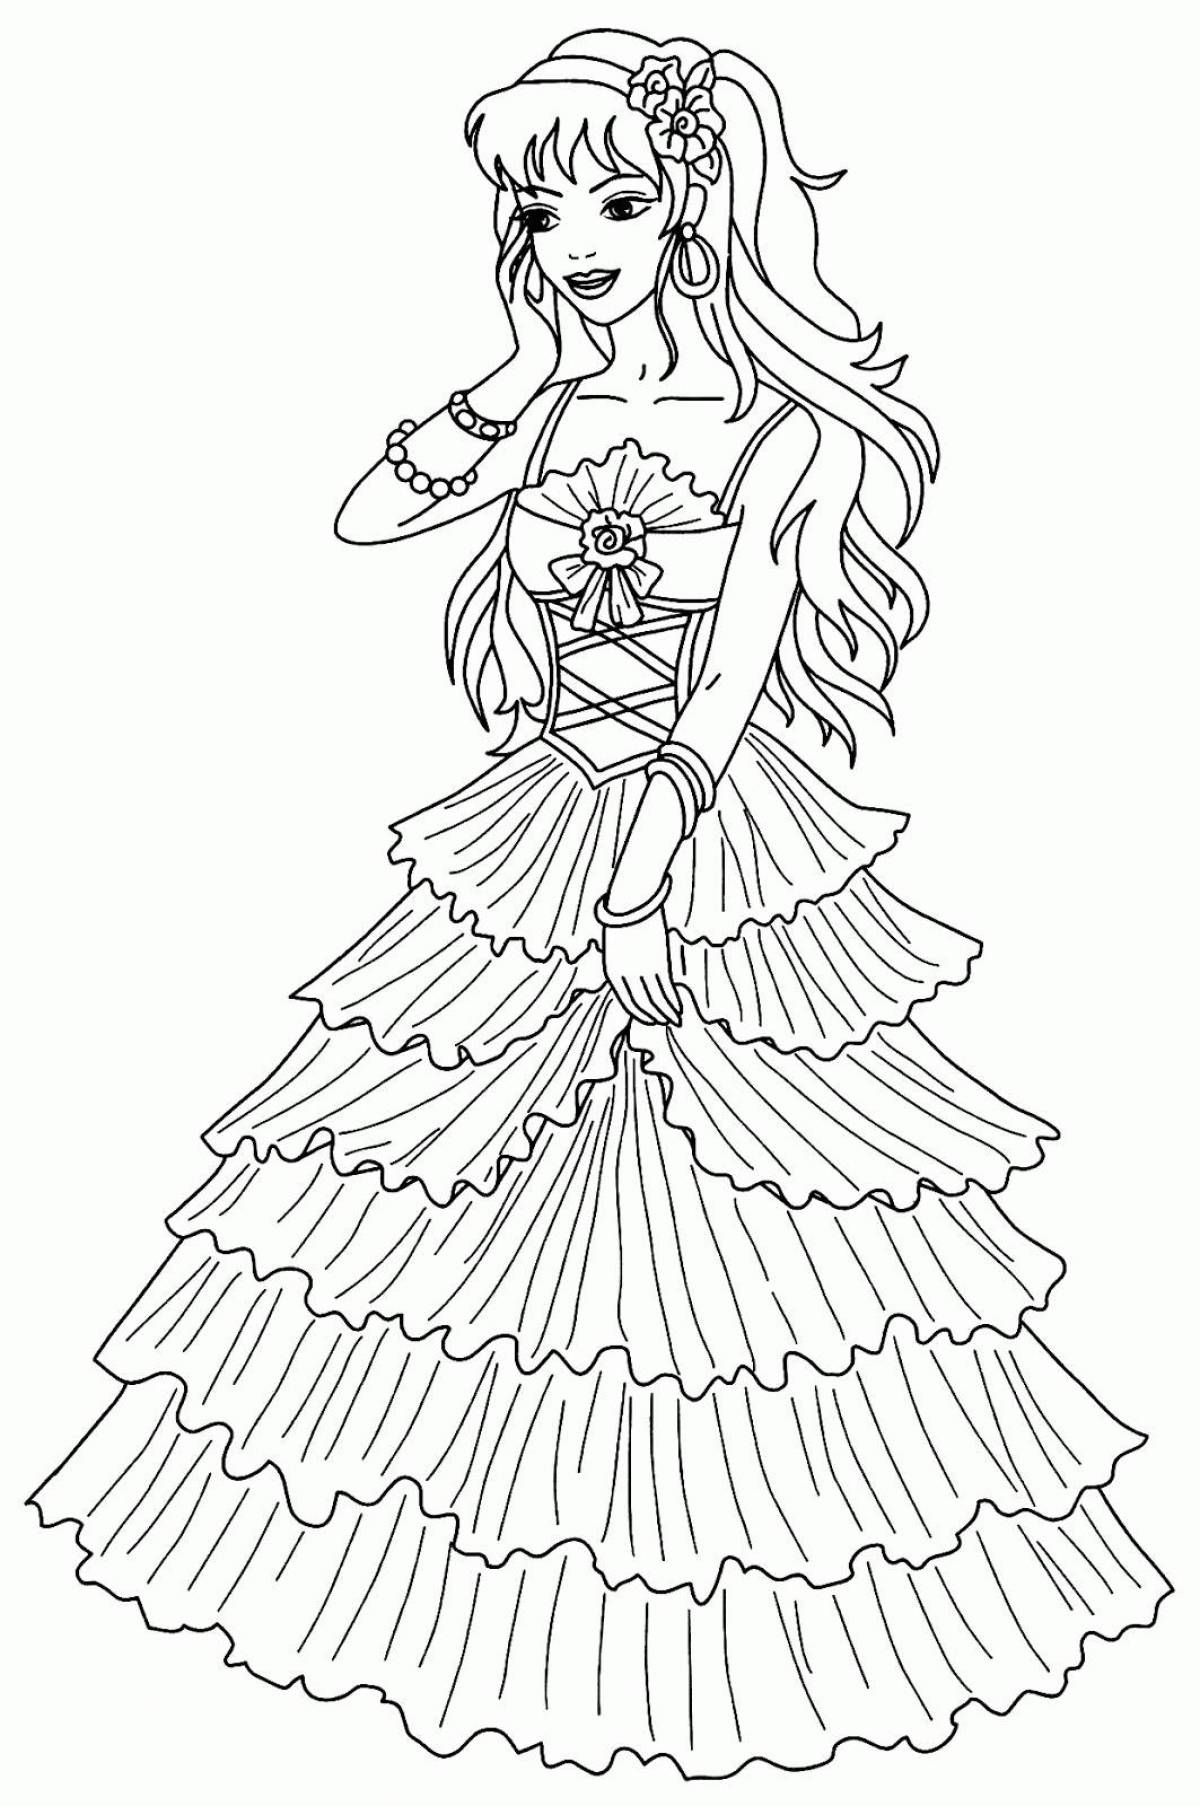 Luxury coloring pages of princesses in beautiful dresses